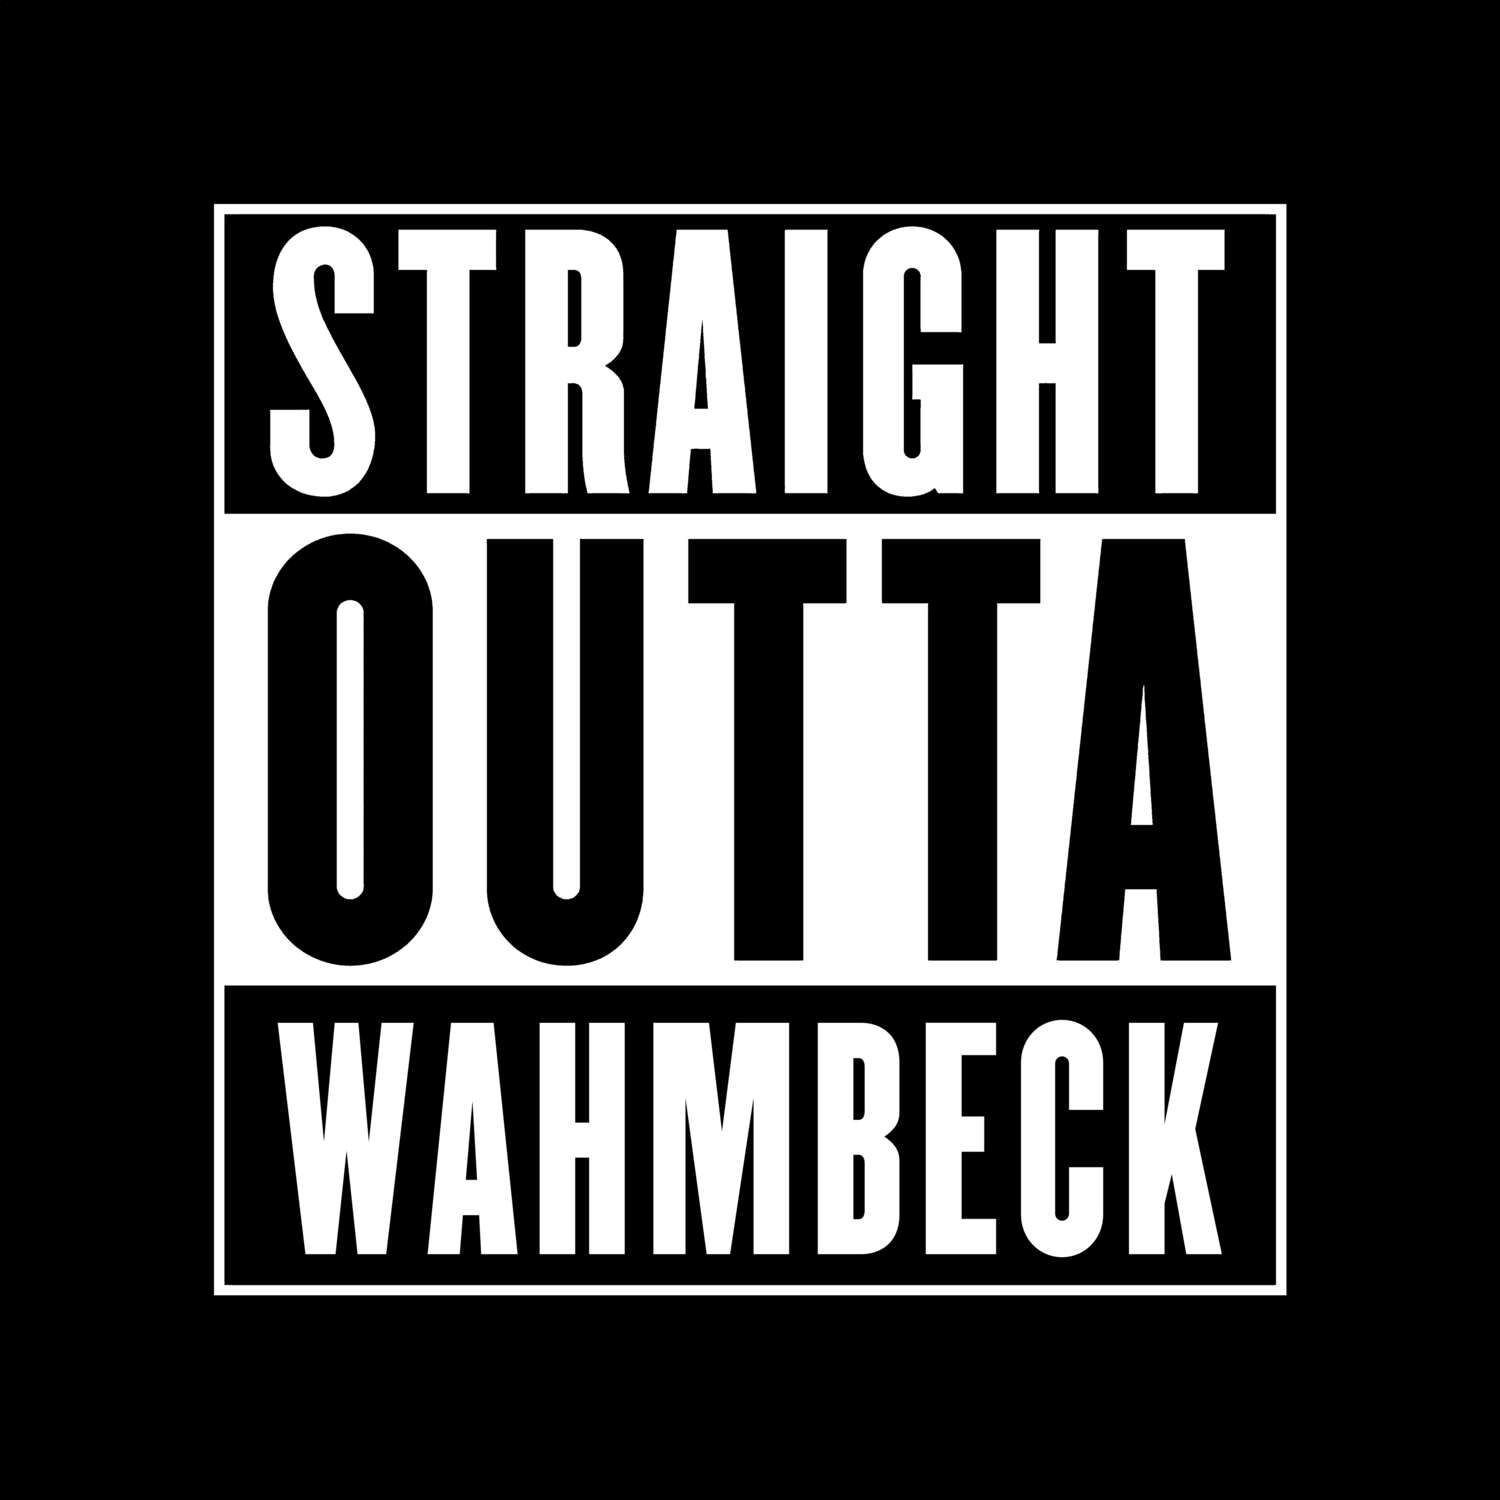 Wahmbeck T-Shirt »Straight Outta«